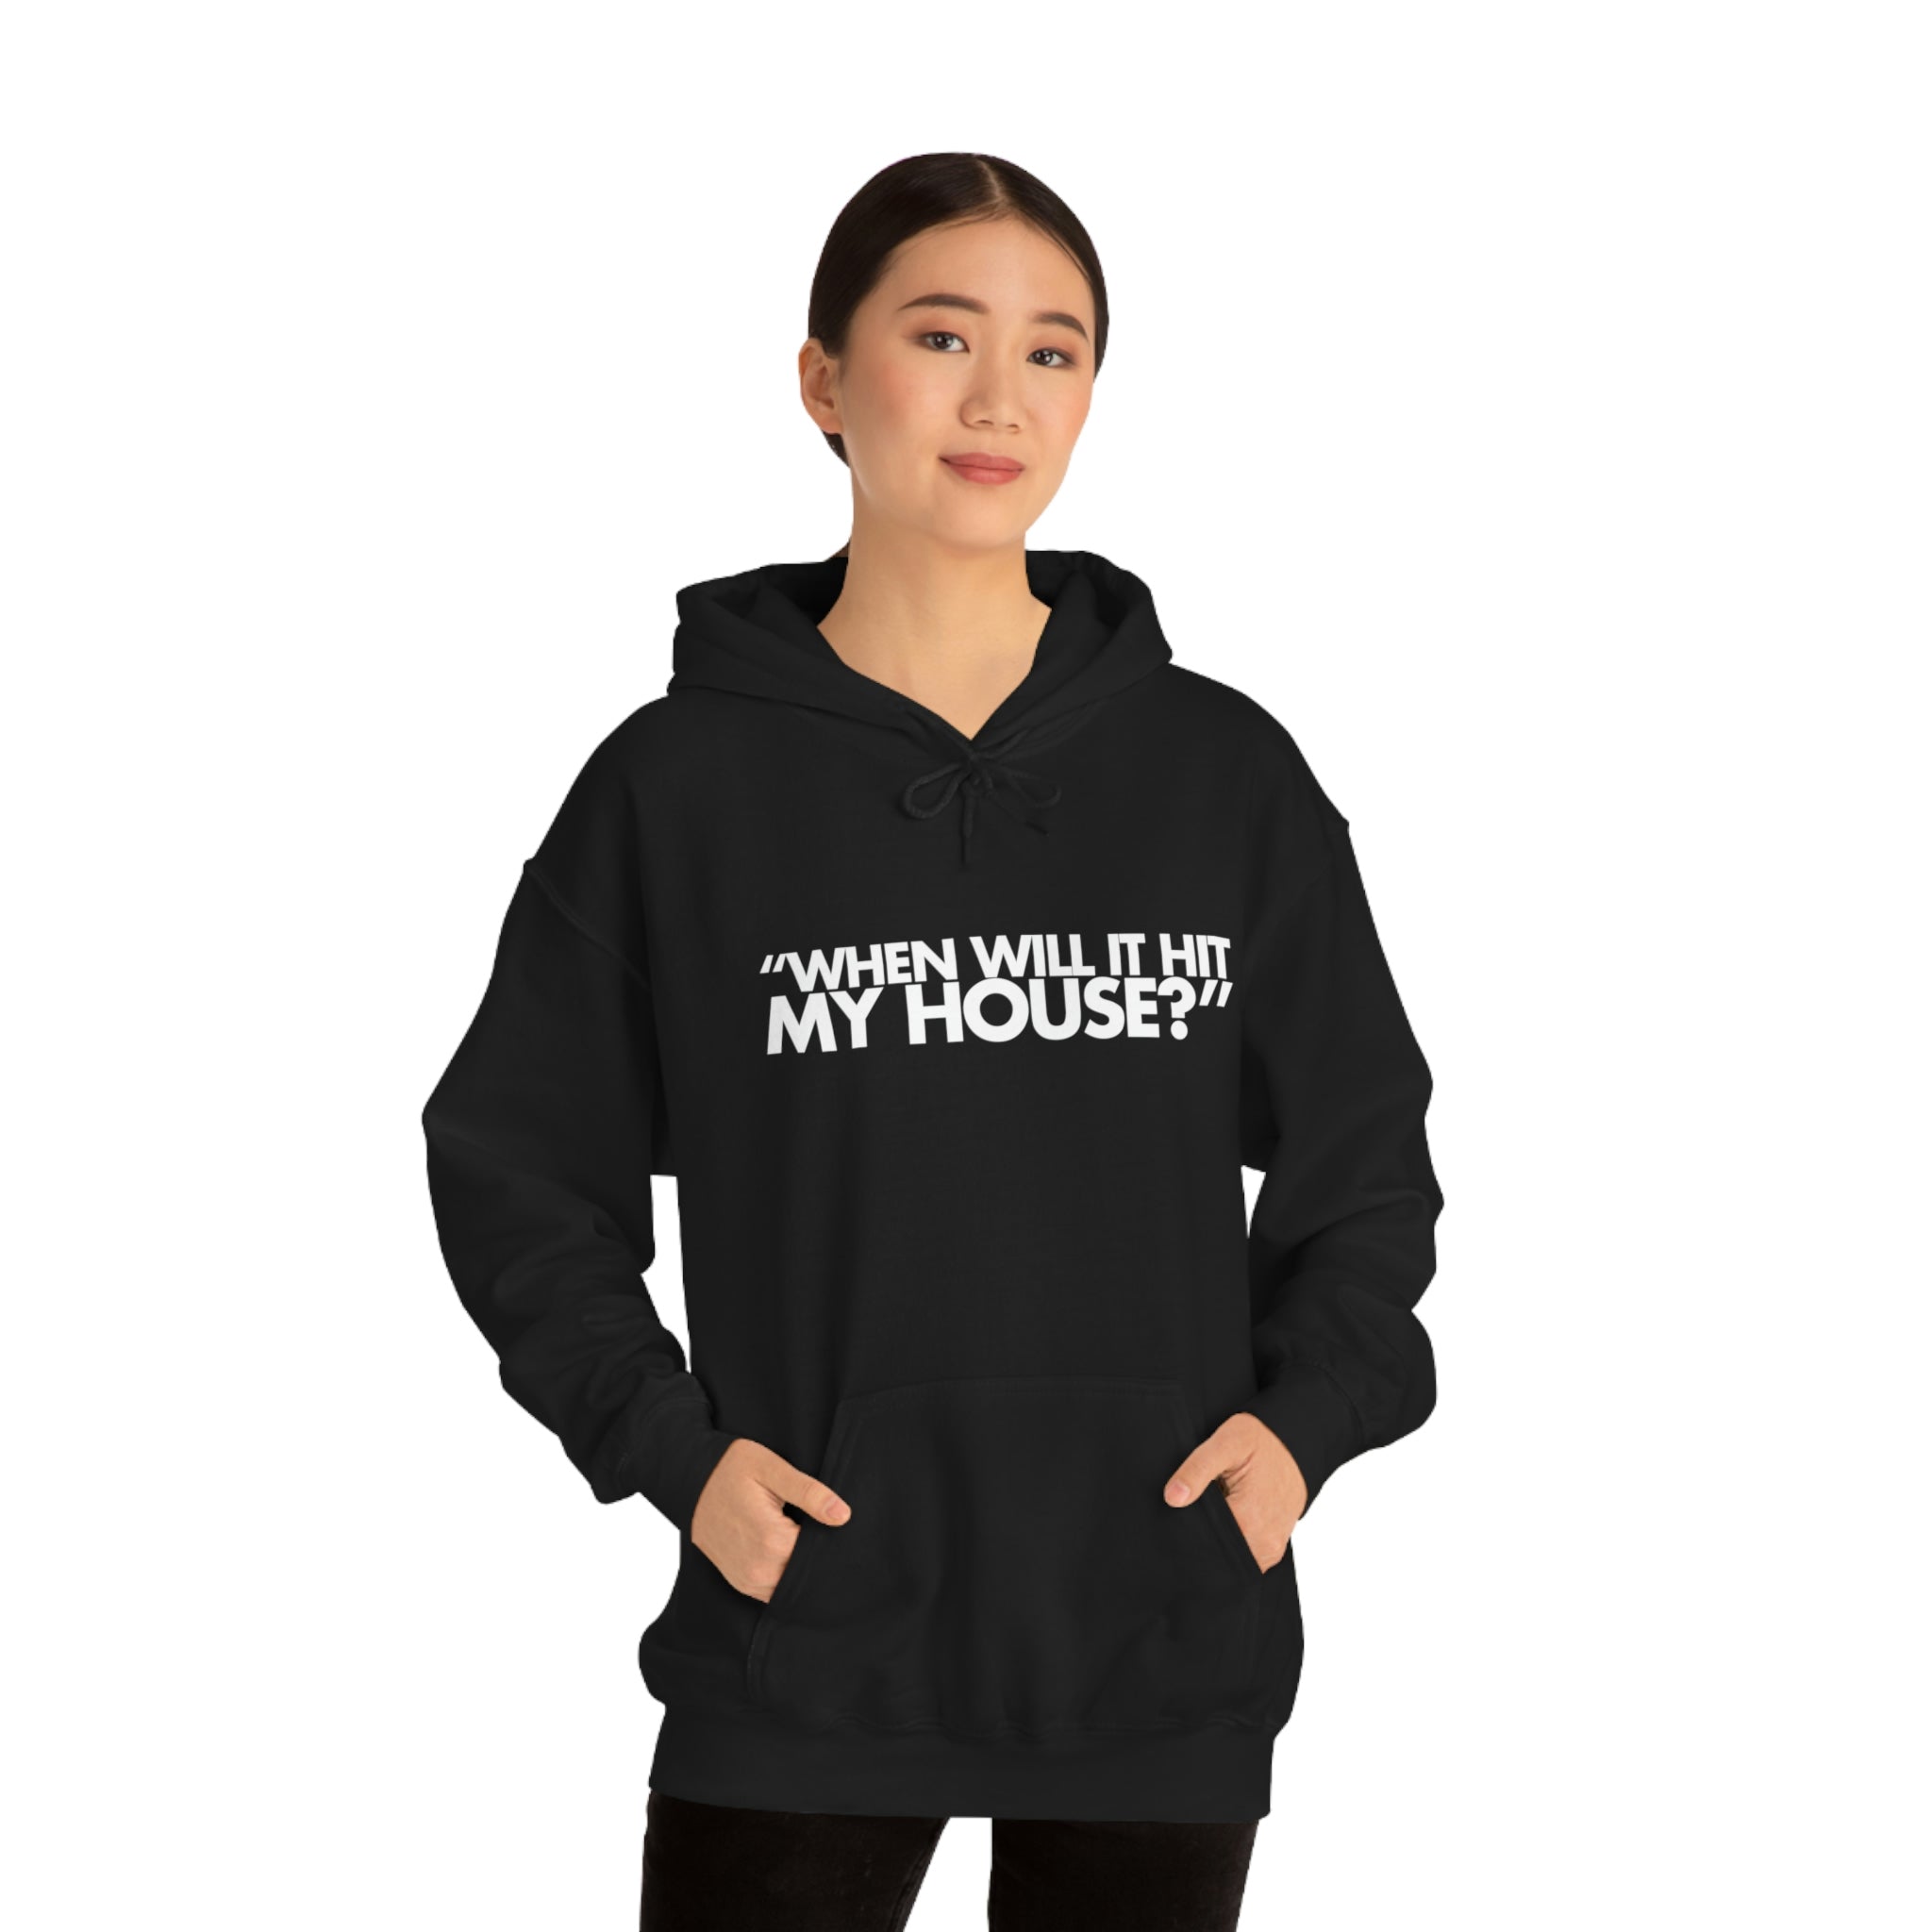 When will it hit my house? Hoodie 